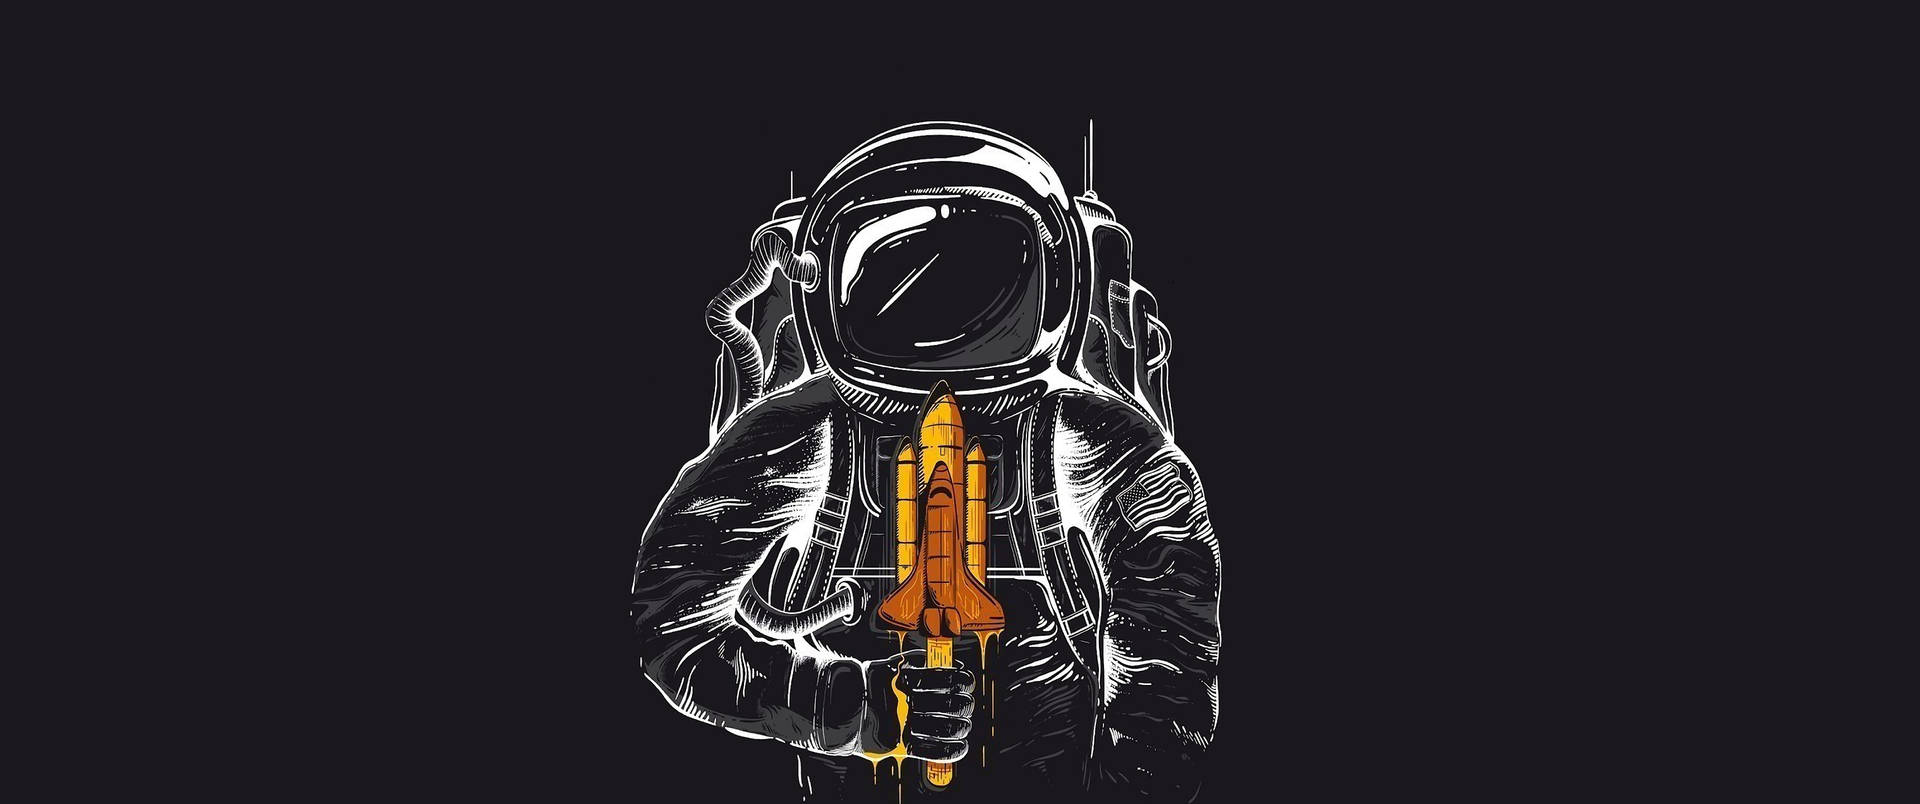 Space Aesthetic Astronaut And Space Shuttle Wallpaper